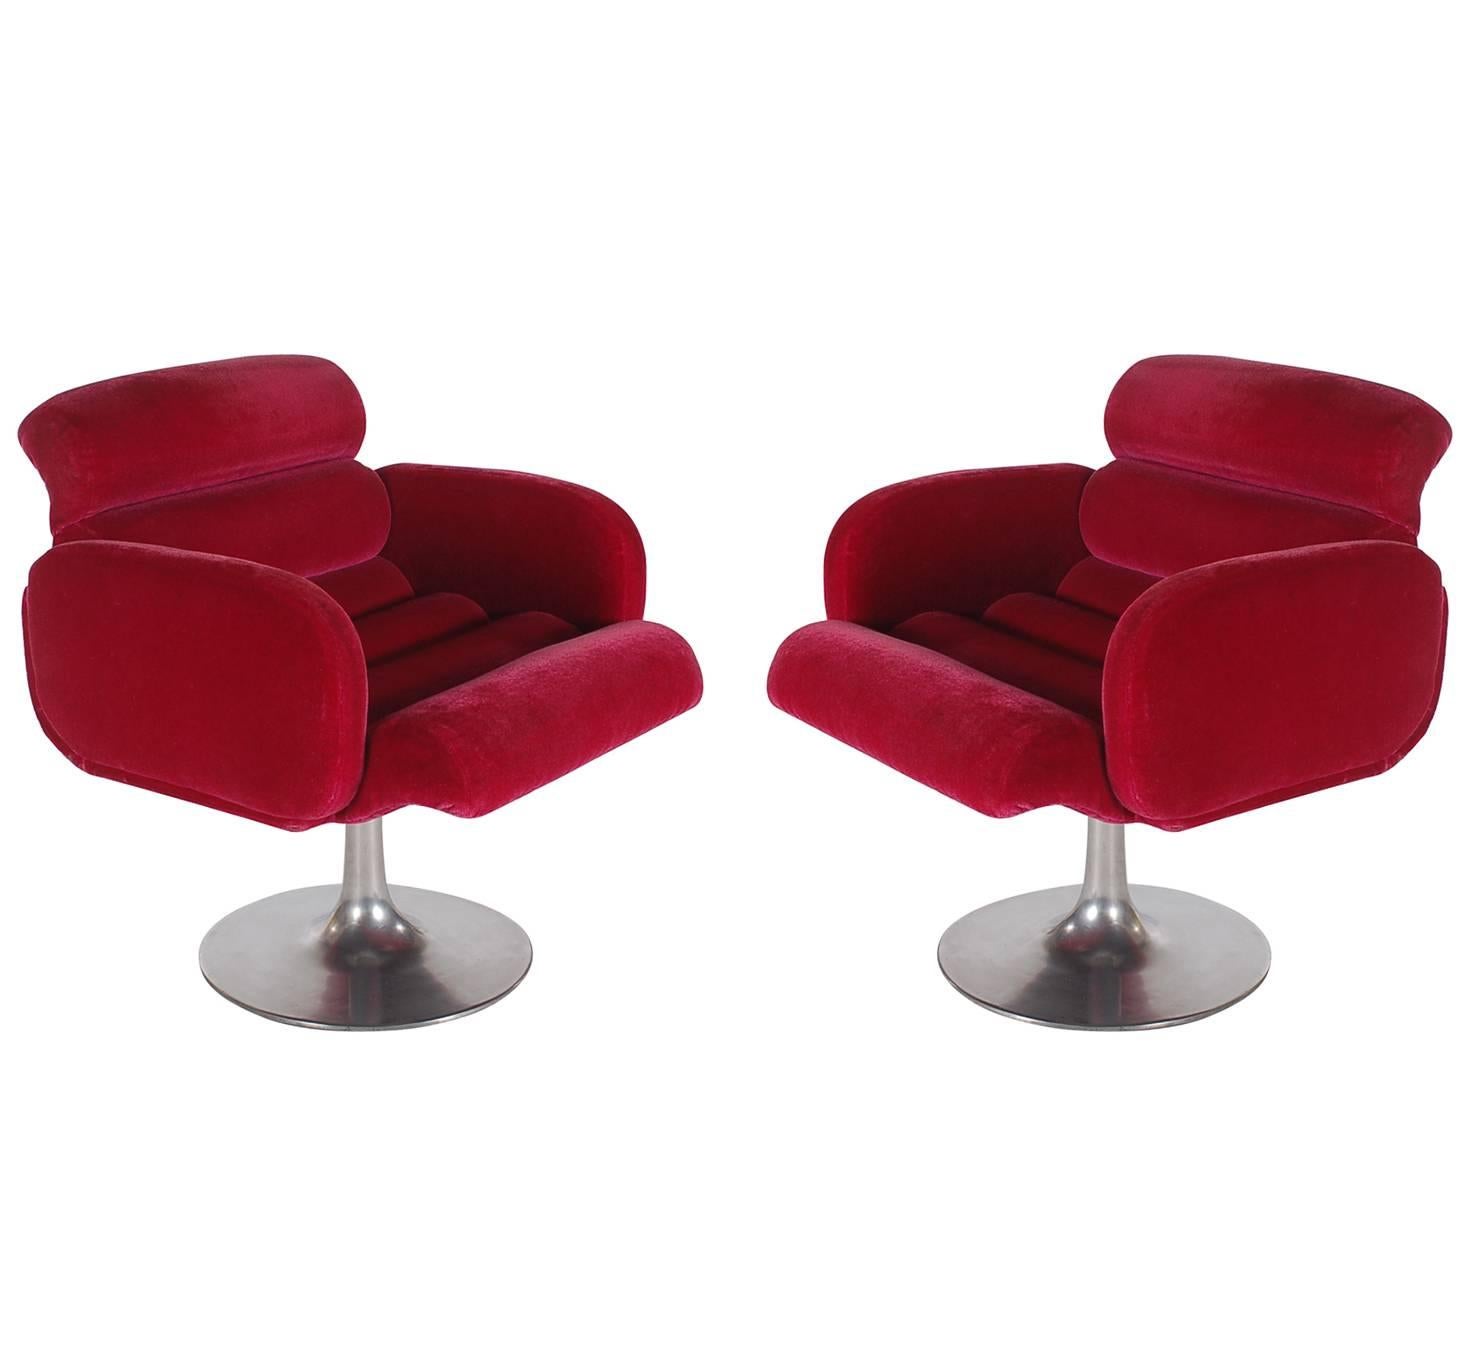 An interesting matching pair of swivel armchairs designed by Stendig and produced in the 1960s. They feature red velvet upholstered seats with aluminum tulip bases. 

In the style of: Milo Baughman or Pierre Paulin.